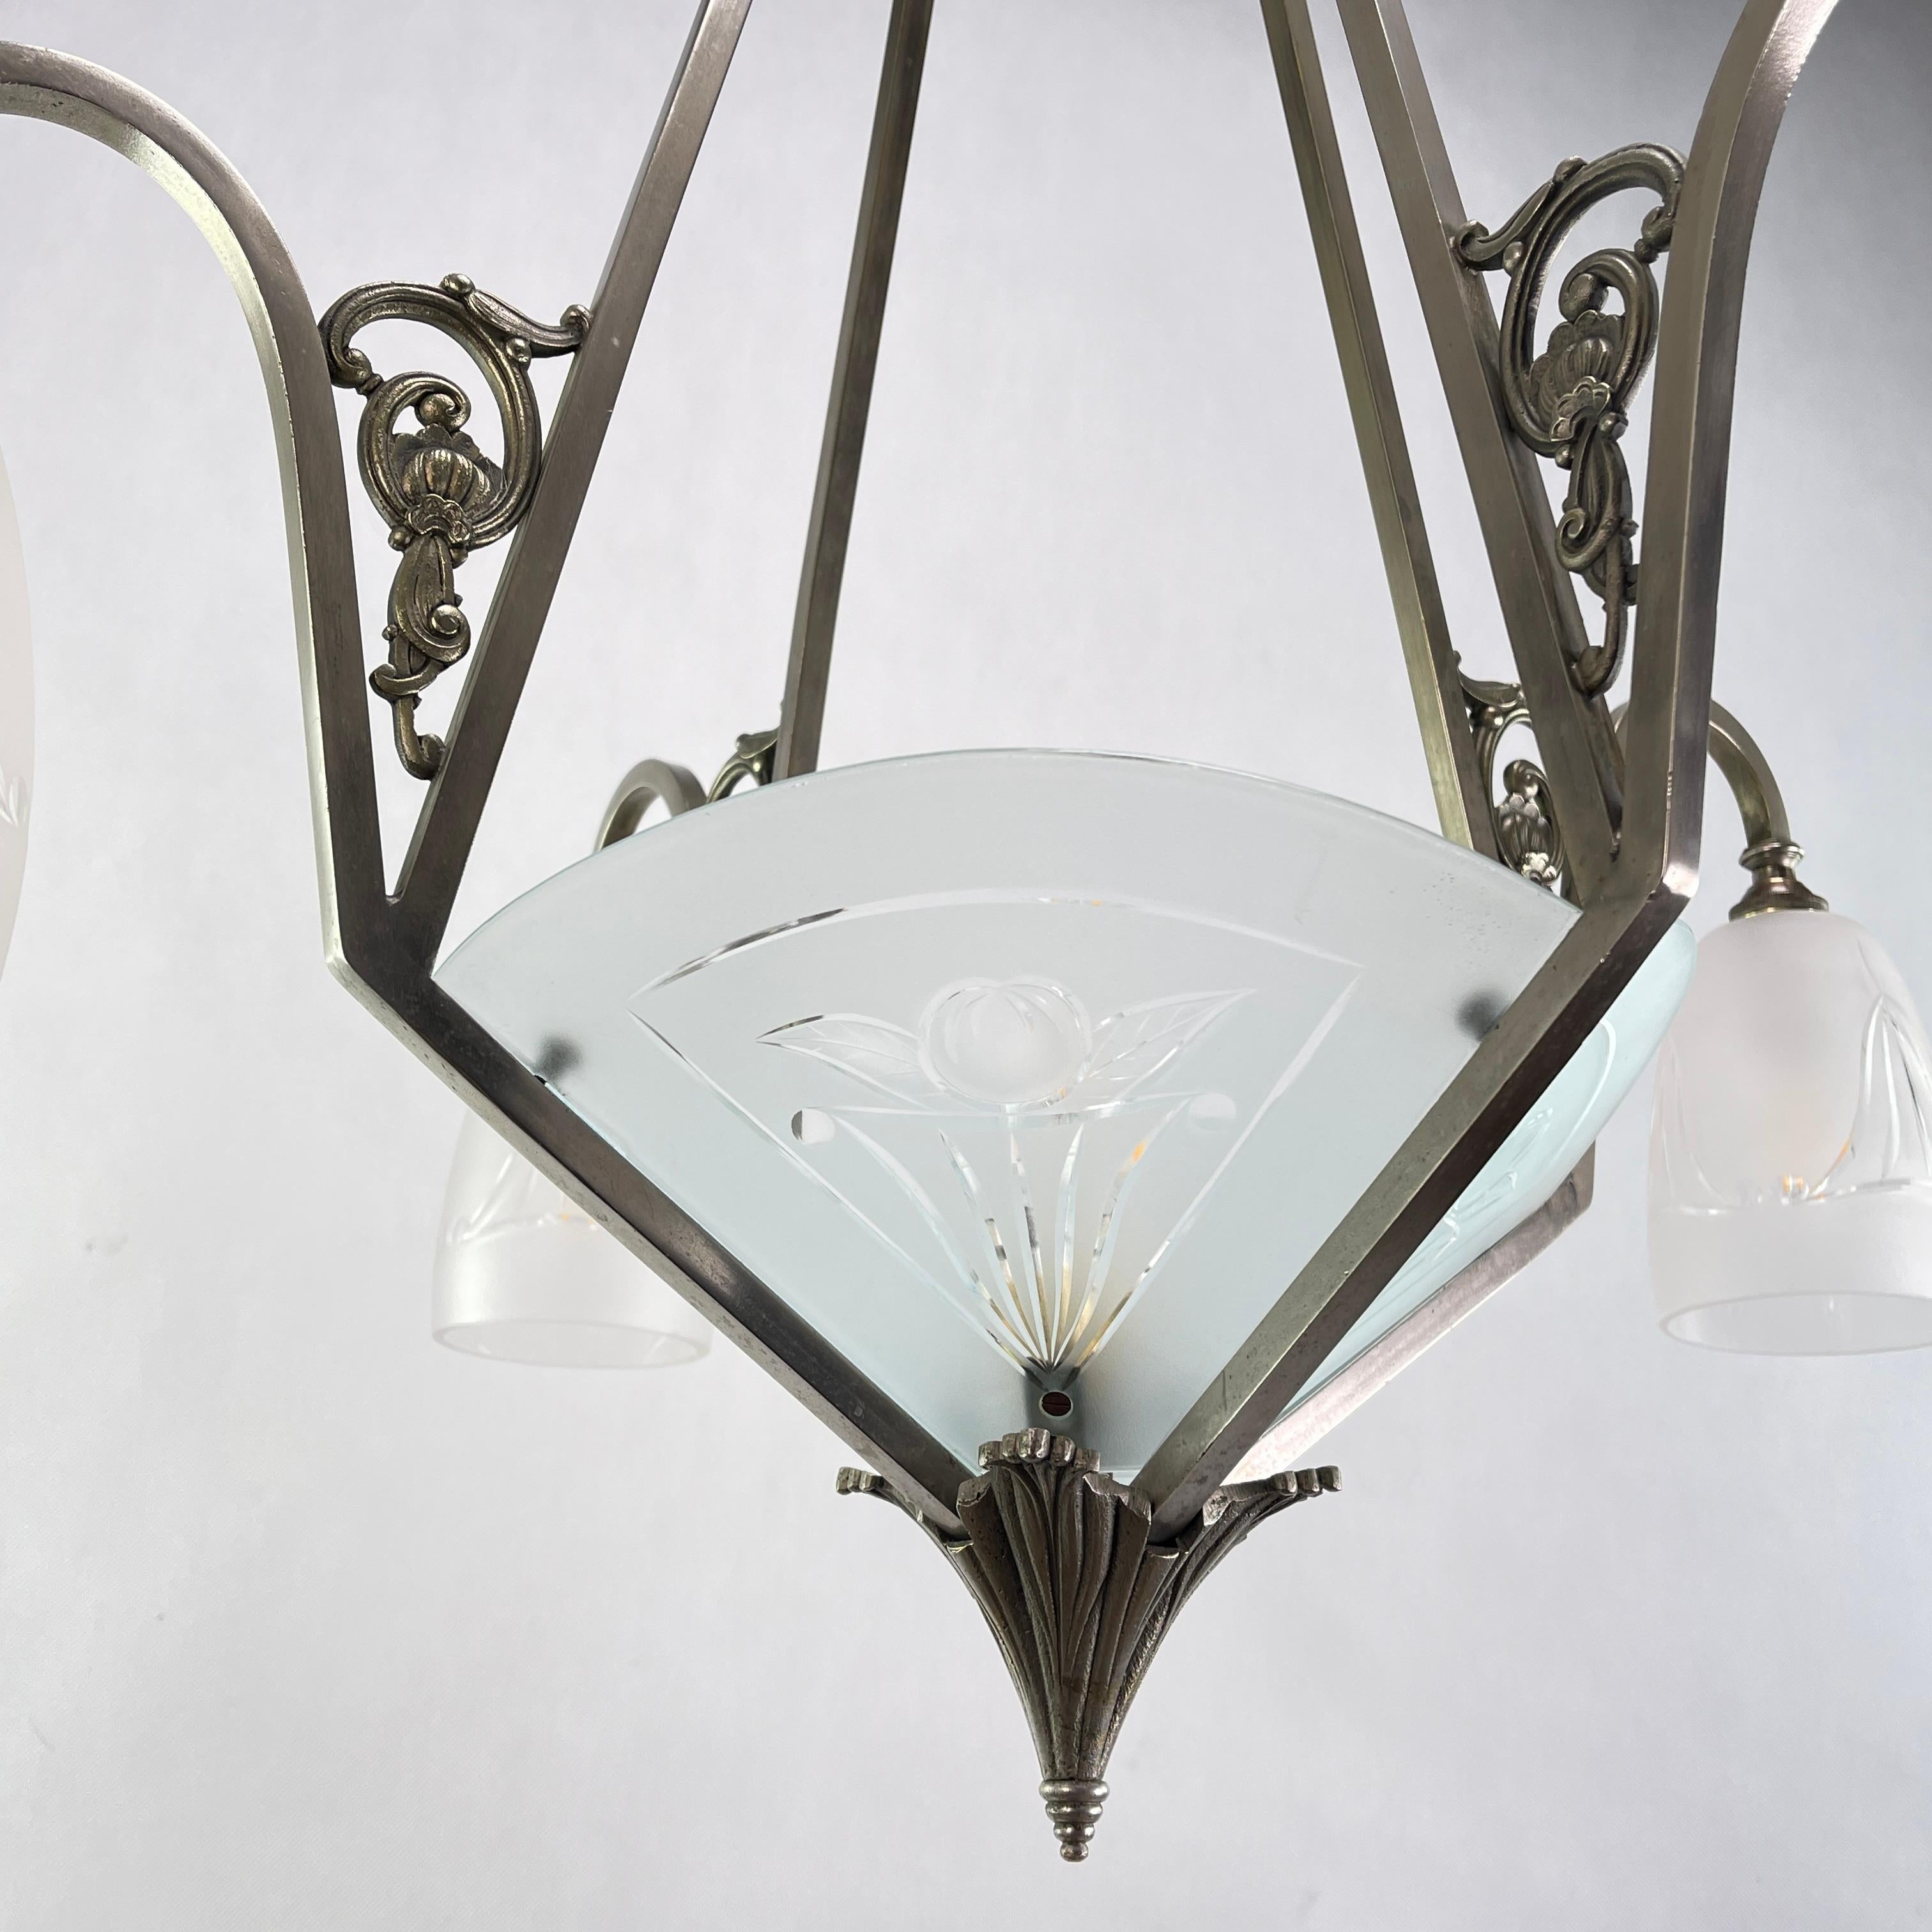 Early 20th Century Art Deco Ceiling Lamp, 1920s